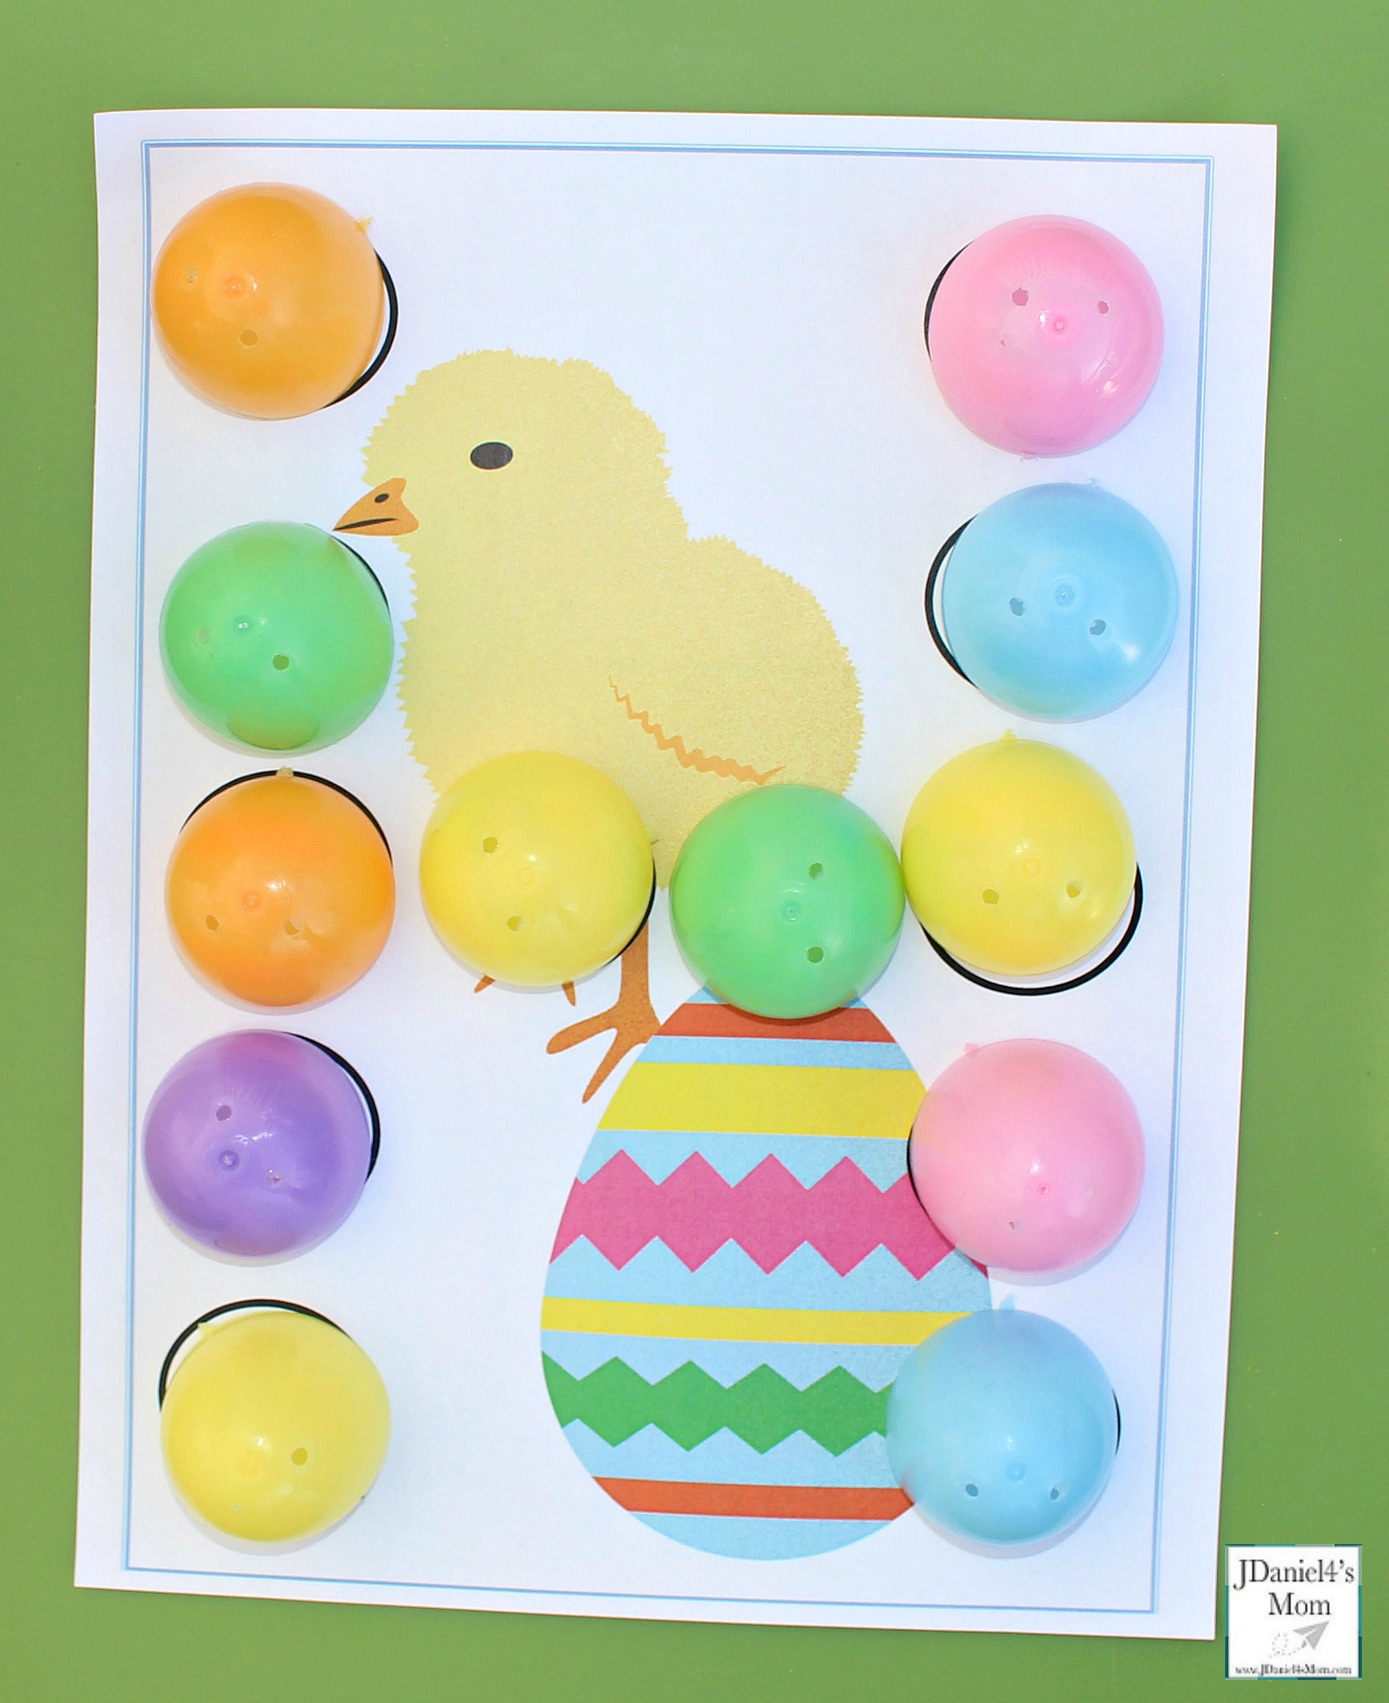 Learning Letters with Plastic Eggs and Printable Mats - Building a Letter H